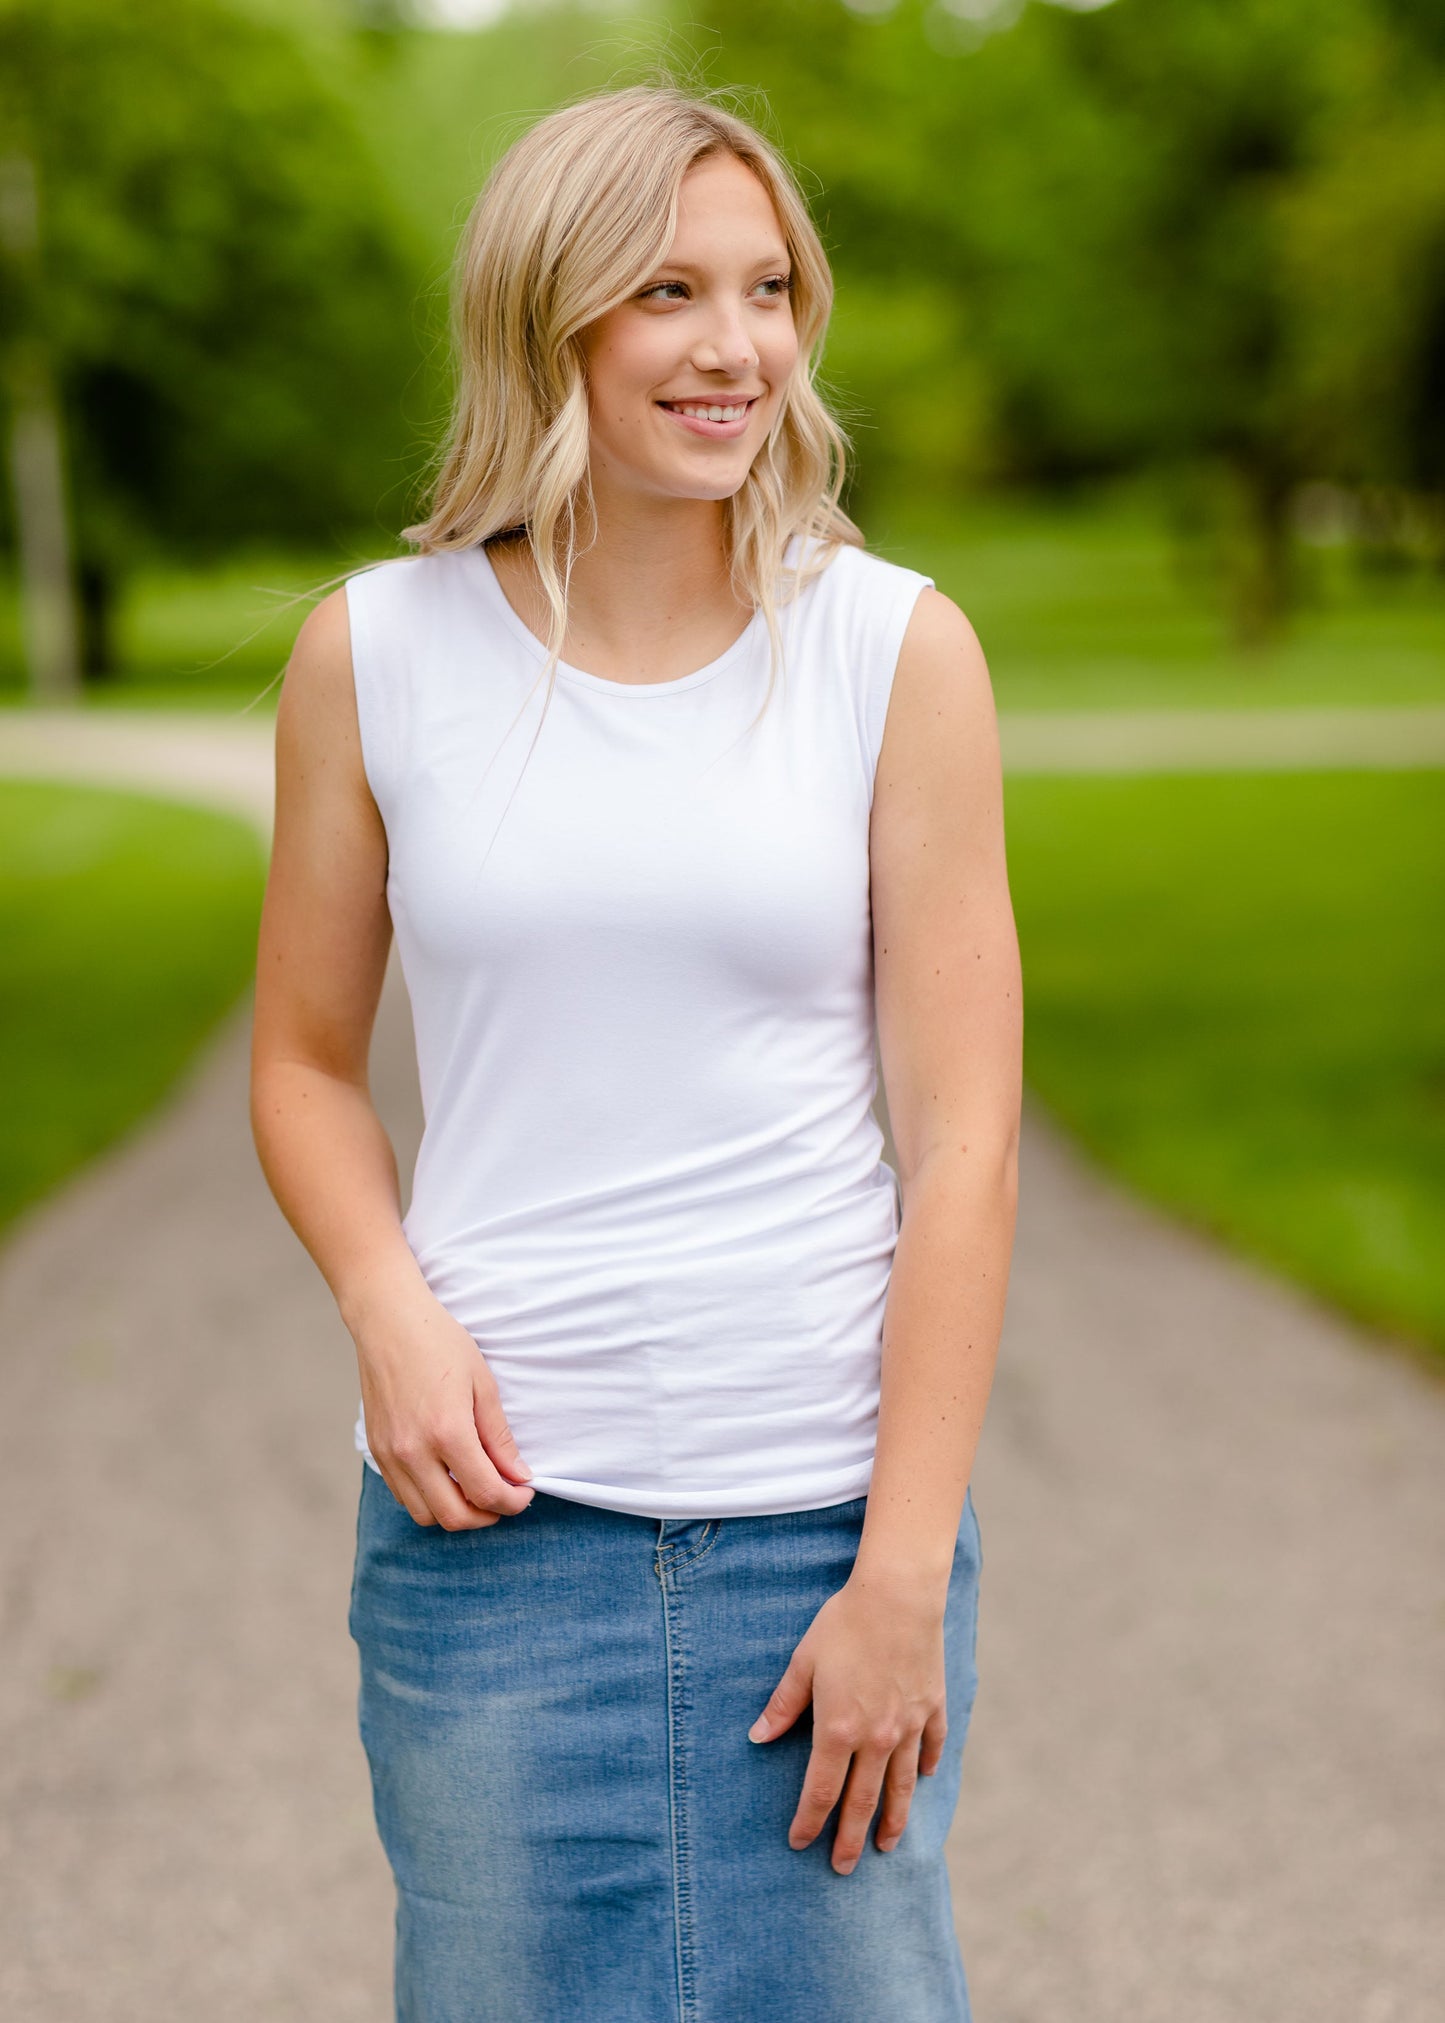 Premium Basic Layering Tank Top Tops White / SA stretchy layering tank with thick straps and a modest round neckline. Comes in three colors black, white, and navy.